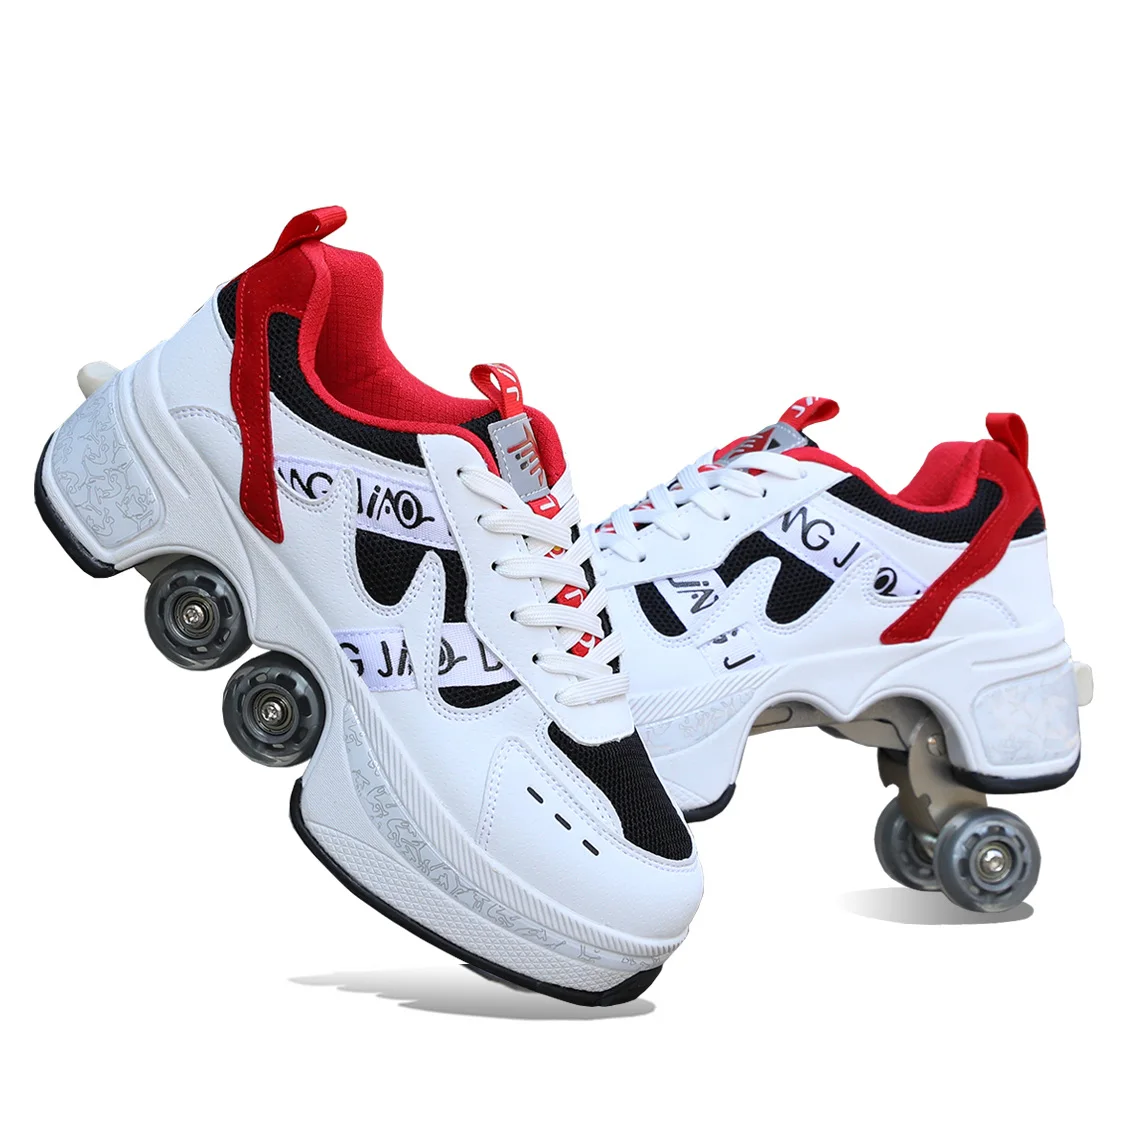 Pu Leather Kids Sport Roller Skate Shoes With 4-Wheel Casual Deformation Parkour Sneakers Skates For Rounds Children Of Running